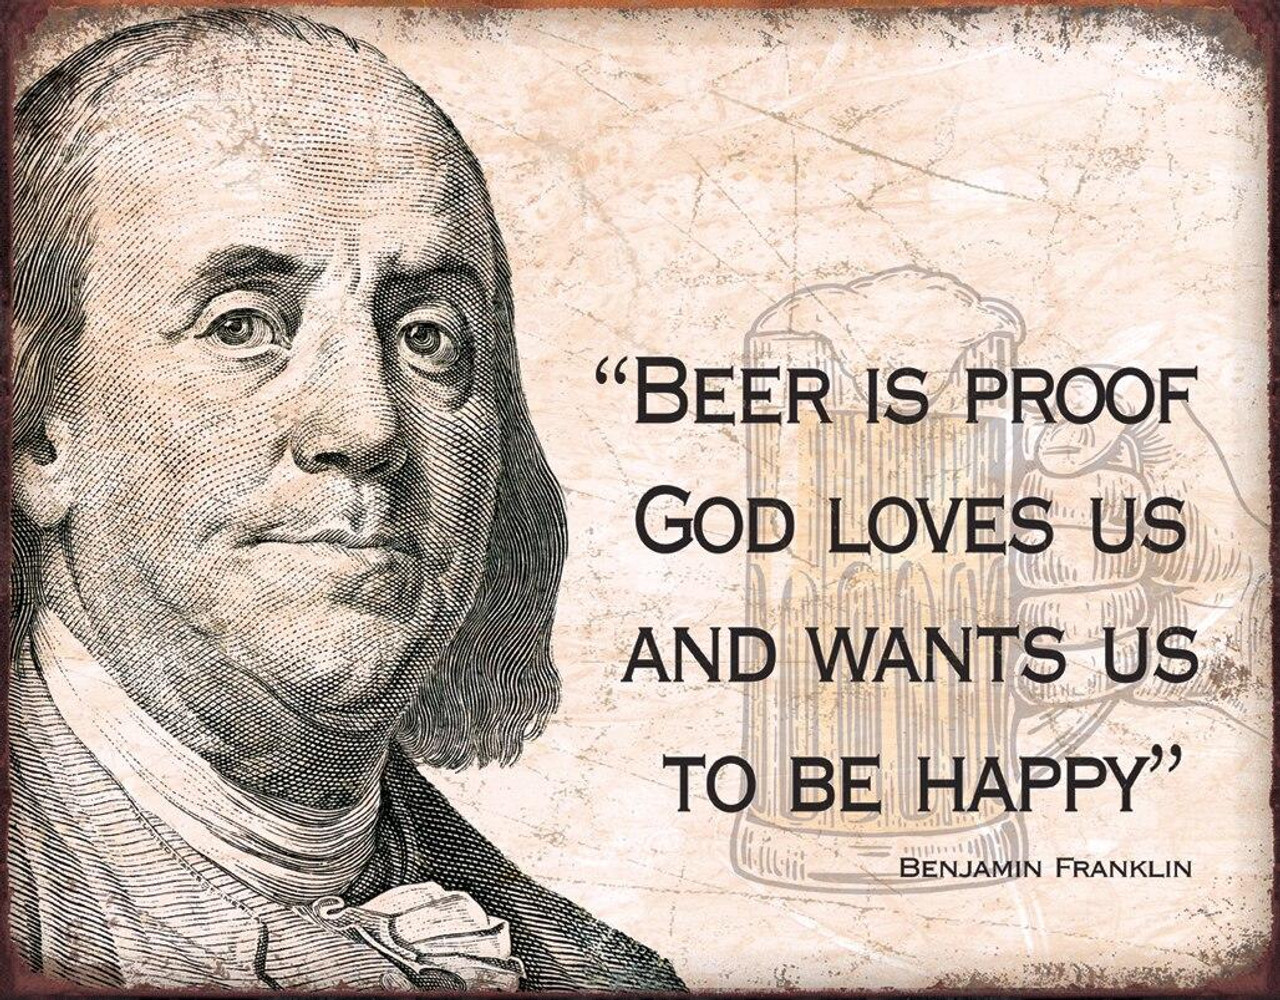 Ben Franklin - Beer
Brand: N/A
Sign Material: Tin sign
Sign Size: 16in x 12.5in - 40.64cm x 31.75cm
Print Layout: Horizontal/Landscape
Made In: U.S.A

Proudly & Always Will be AMERICAN Made!